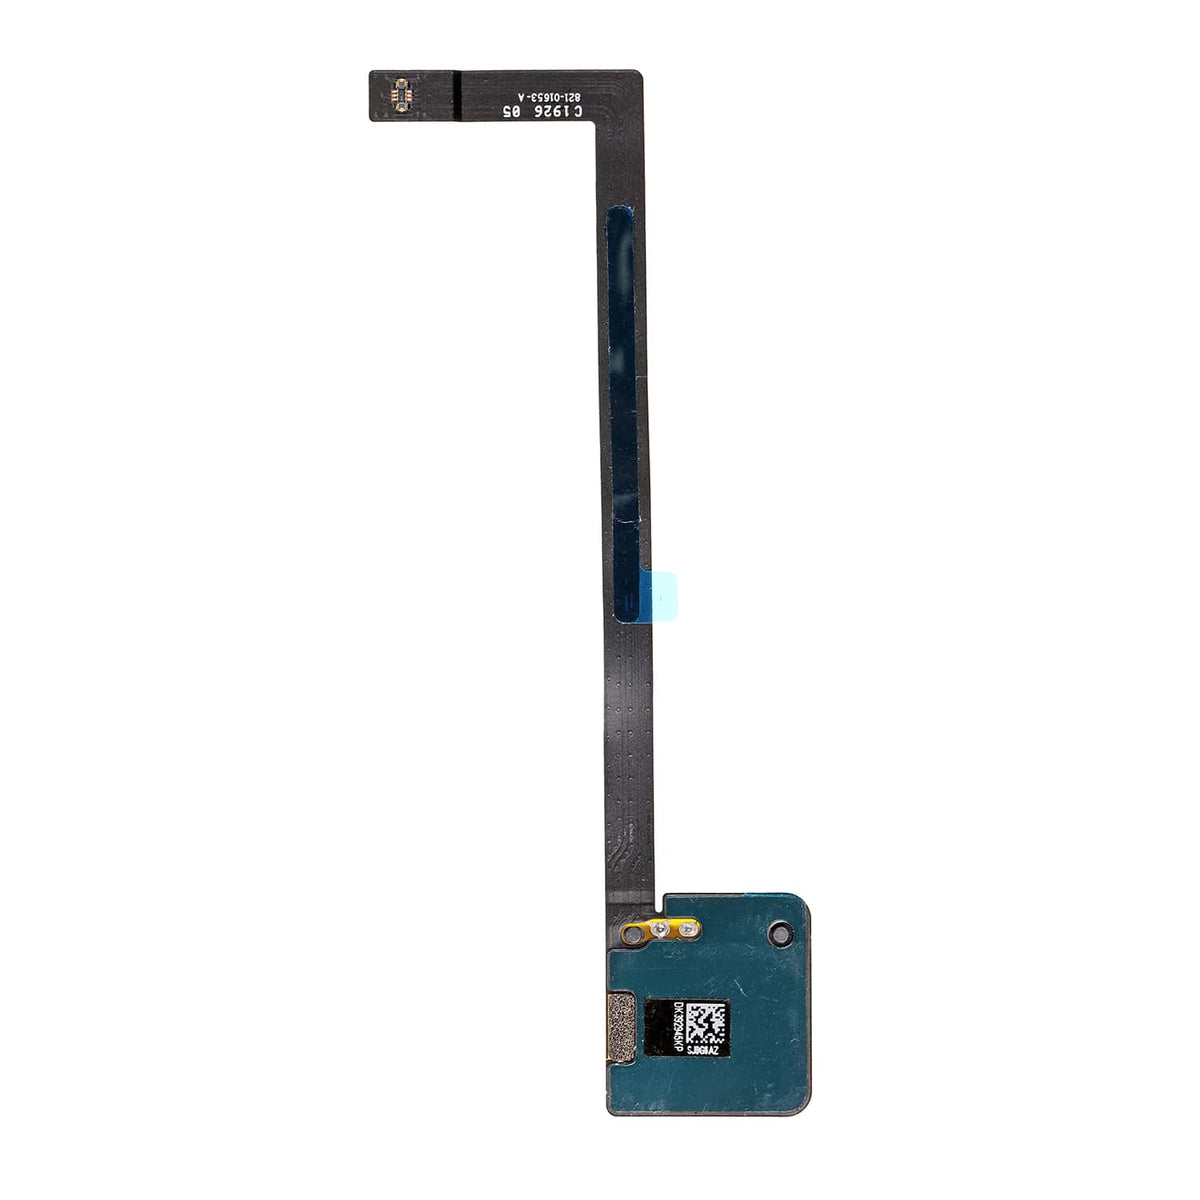 SIM CARD SLOT WITH FLEX CABLE FOR IPAD PRO 12.9 4TH